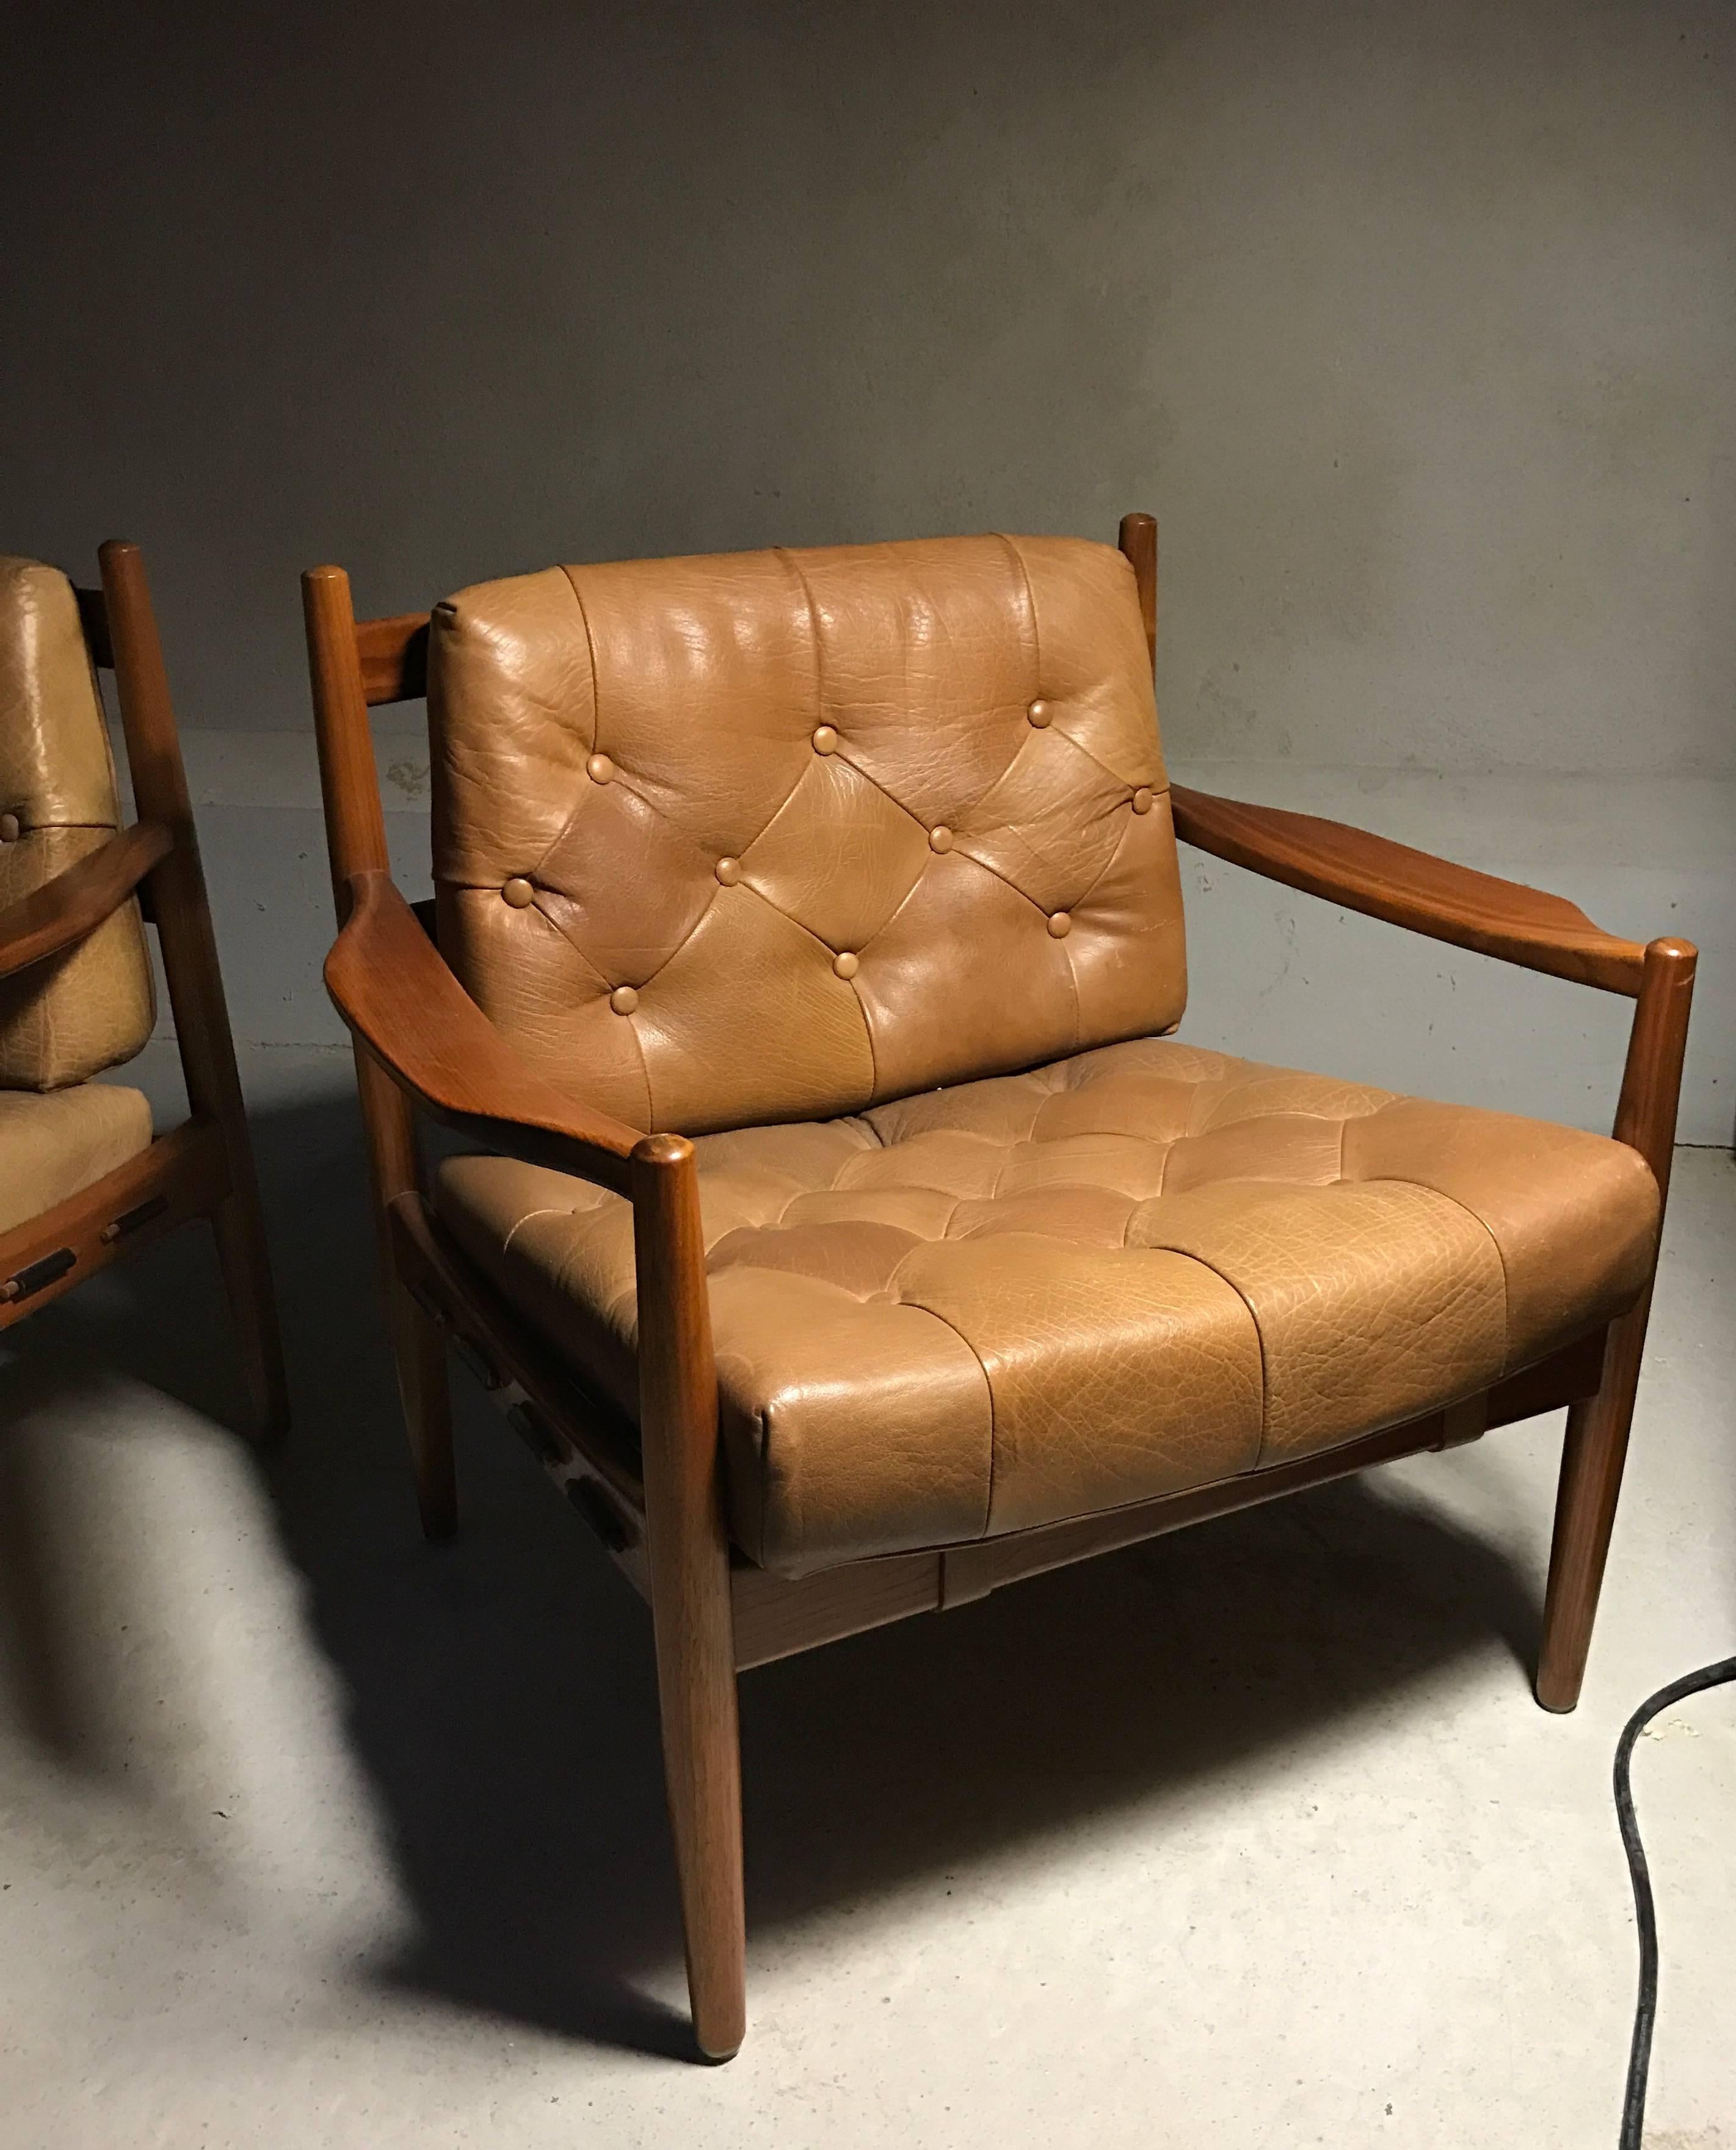 Pair of Armchairs by Ingemar Thillmark for OPE Mobler, Midcentury Modern 1